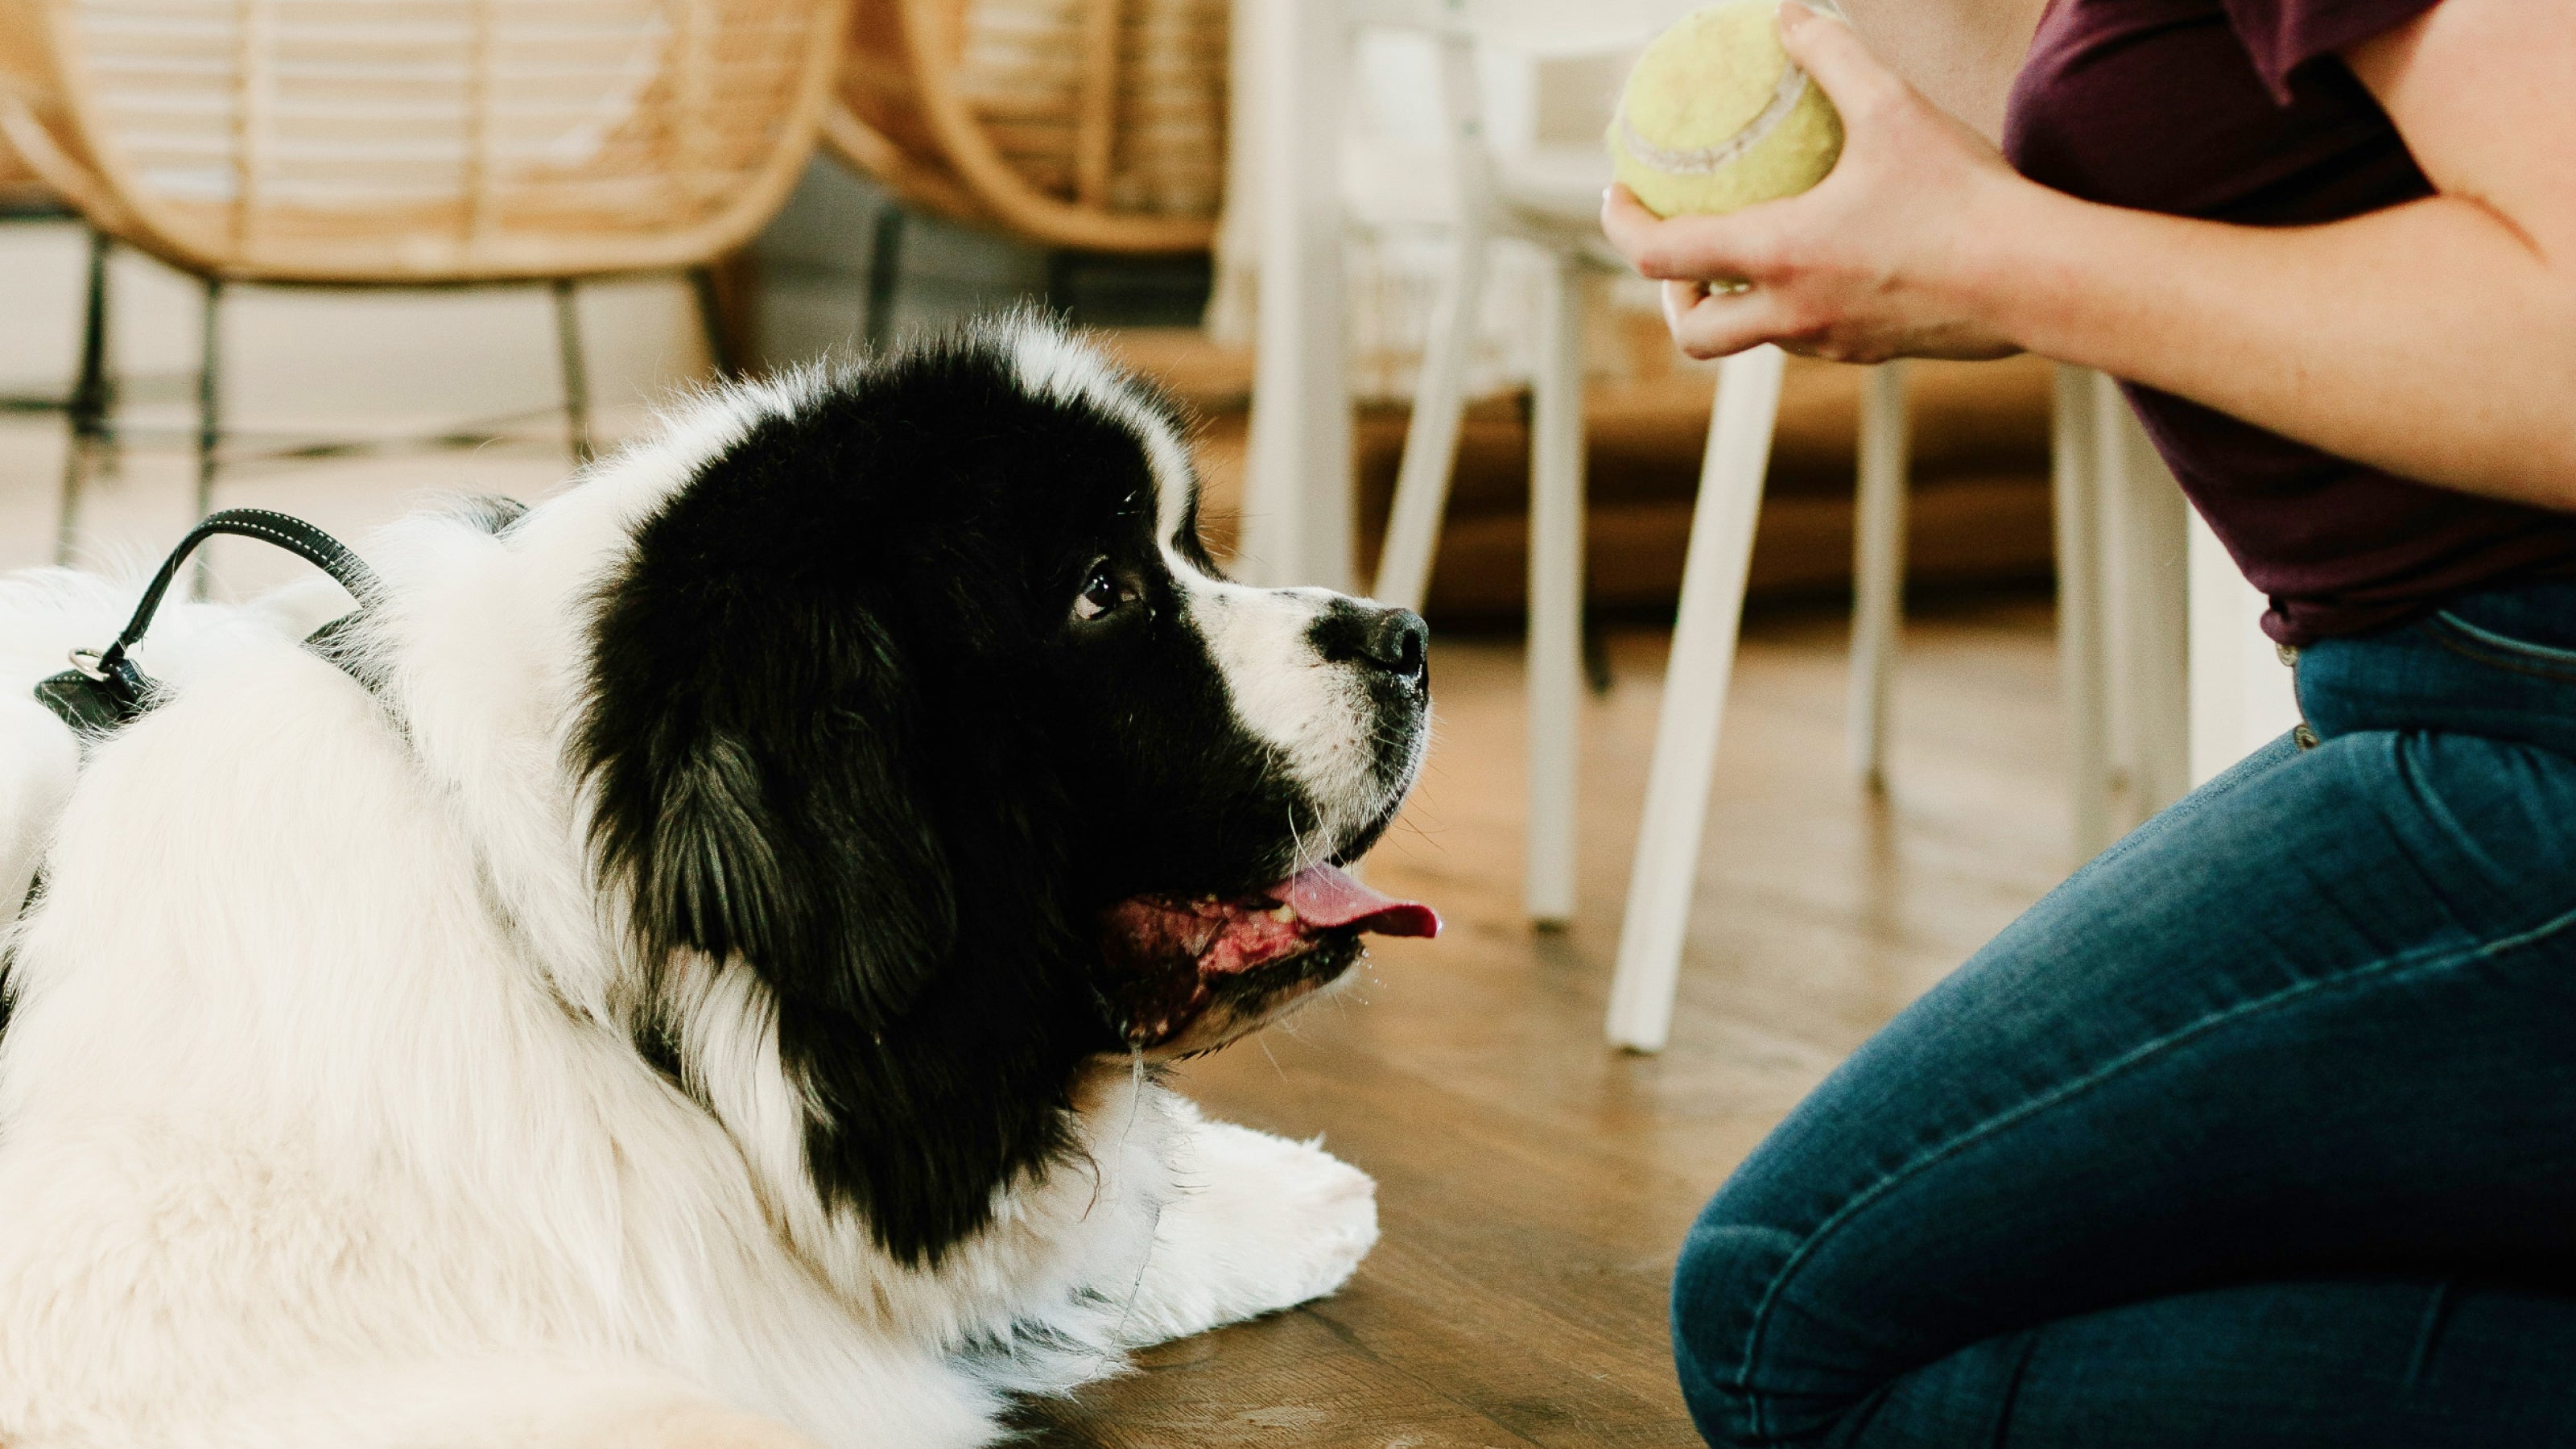 A black and white dog looks up at its person who is holding a yellow tennis ball